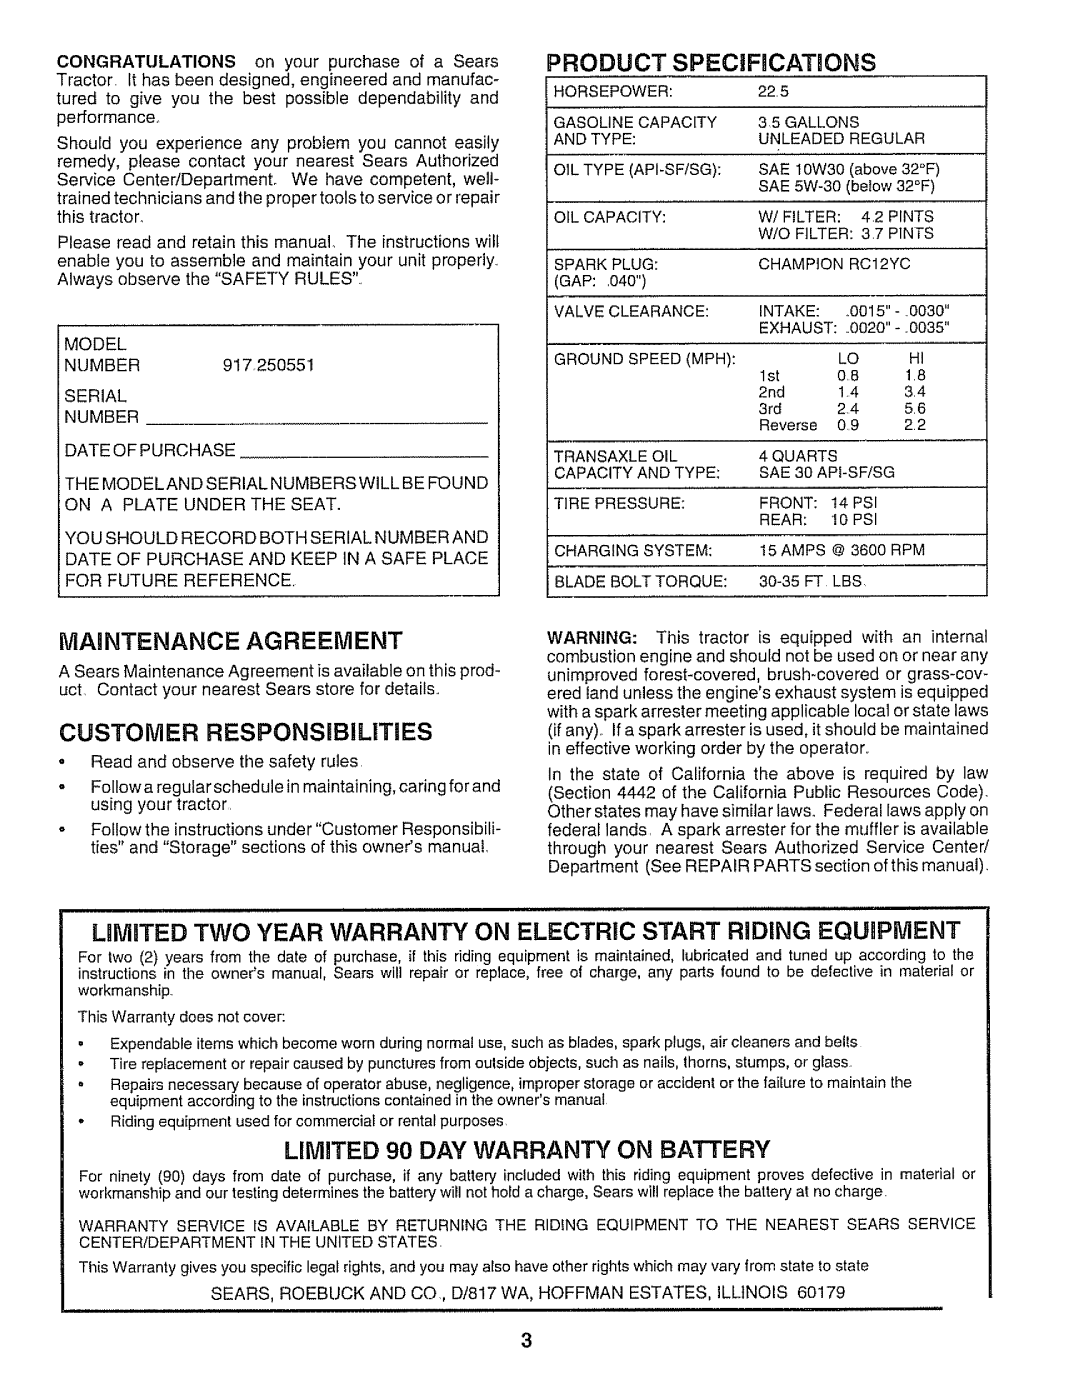 Sears 917.250551 manual Maintenance Agreement, Customer Responsibilities, Product Specifications 